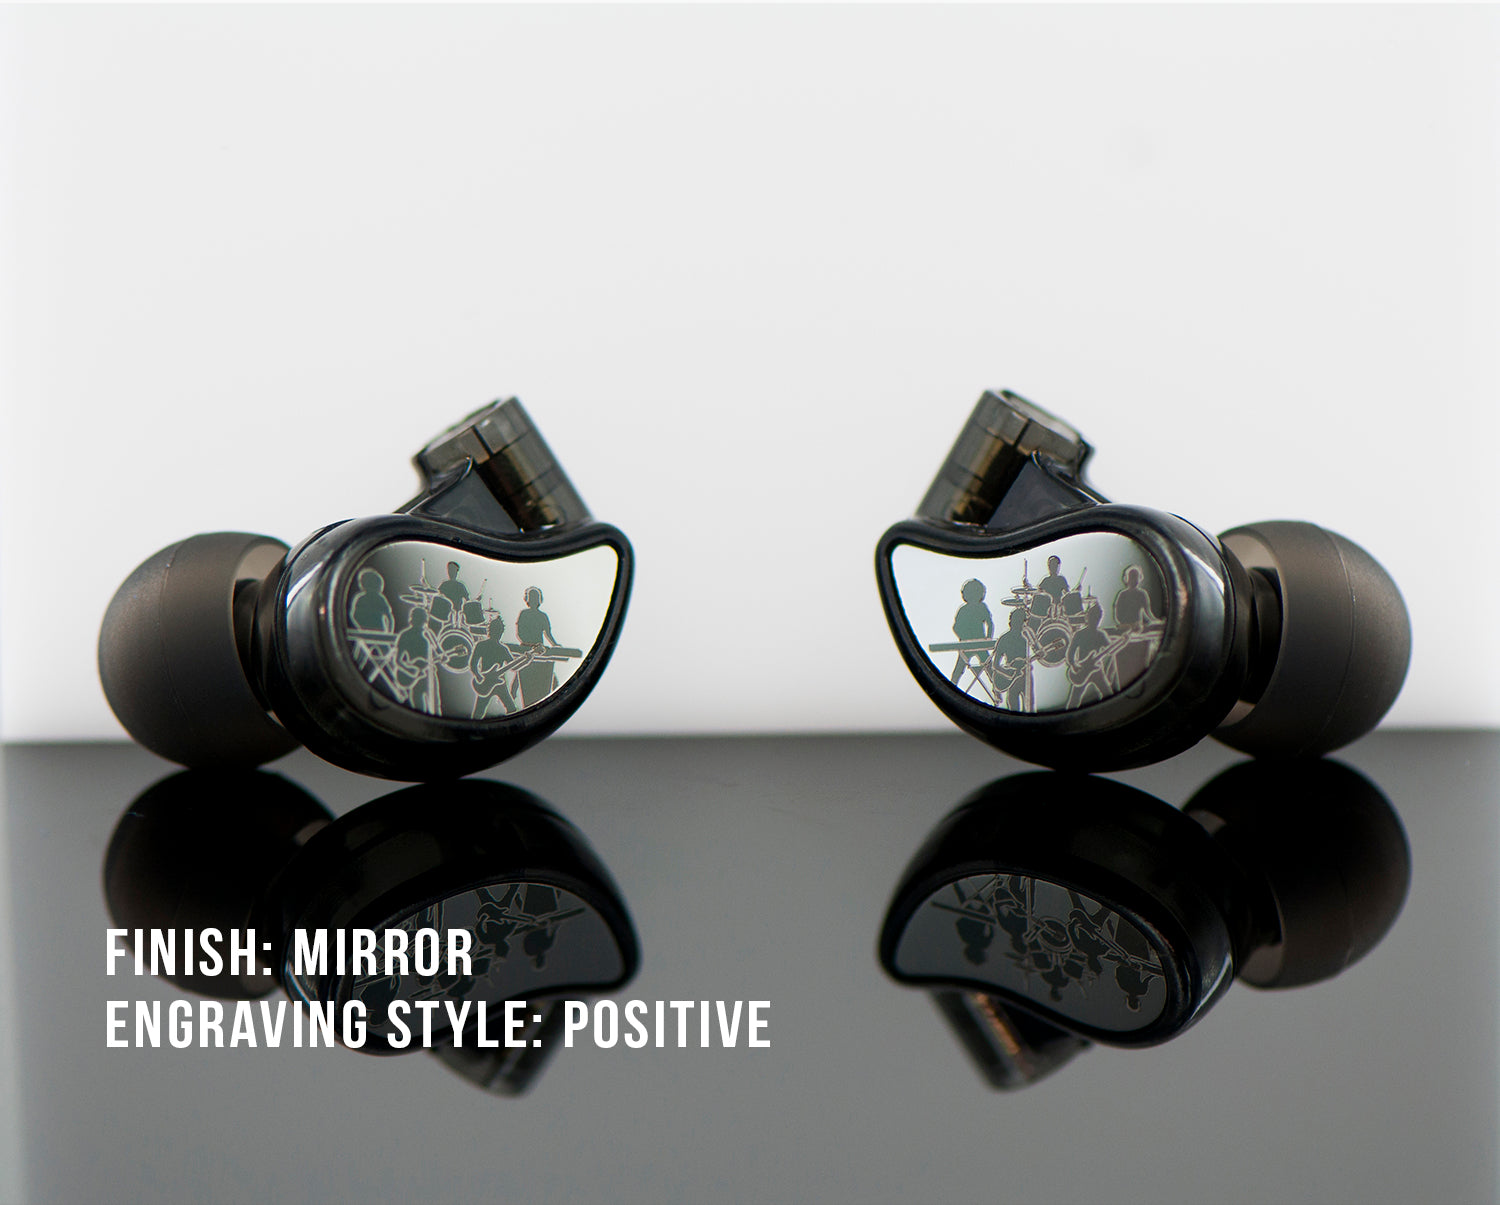 Two black, mirrored-finish in-ear monitors with an engraved design featuring multiple figures, displayed on a reflective surface against a light background. text labels state "finish: mirror" and "engraving style: positive.